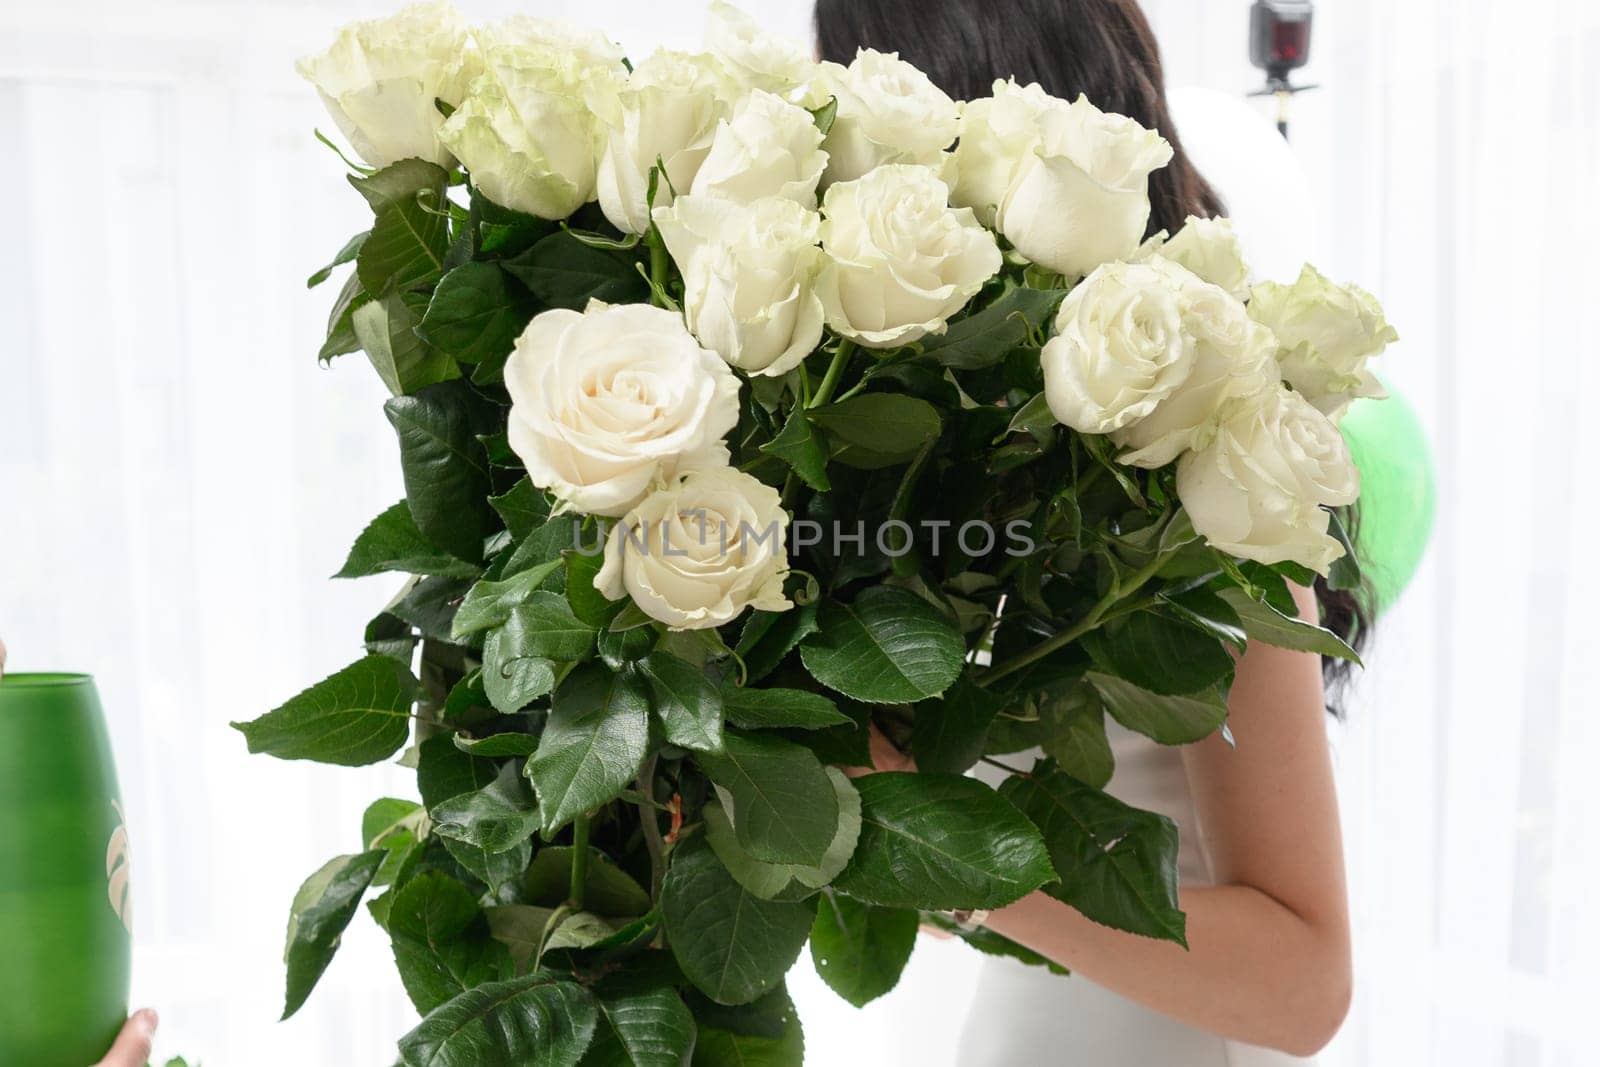 The girl holds a large bouquet of white roses in her hands. by Niko_Cingaryuk